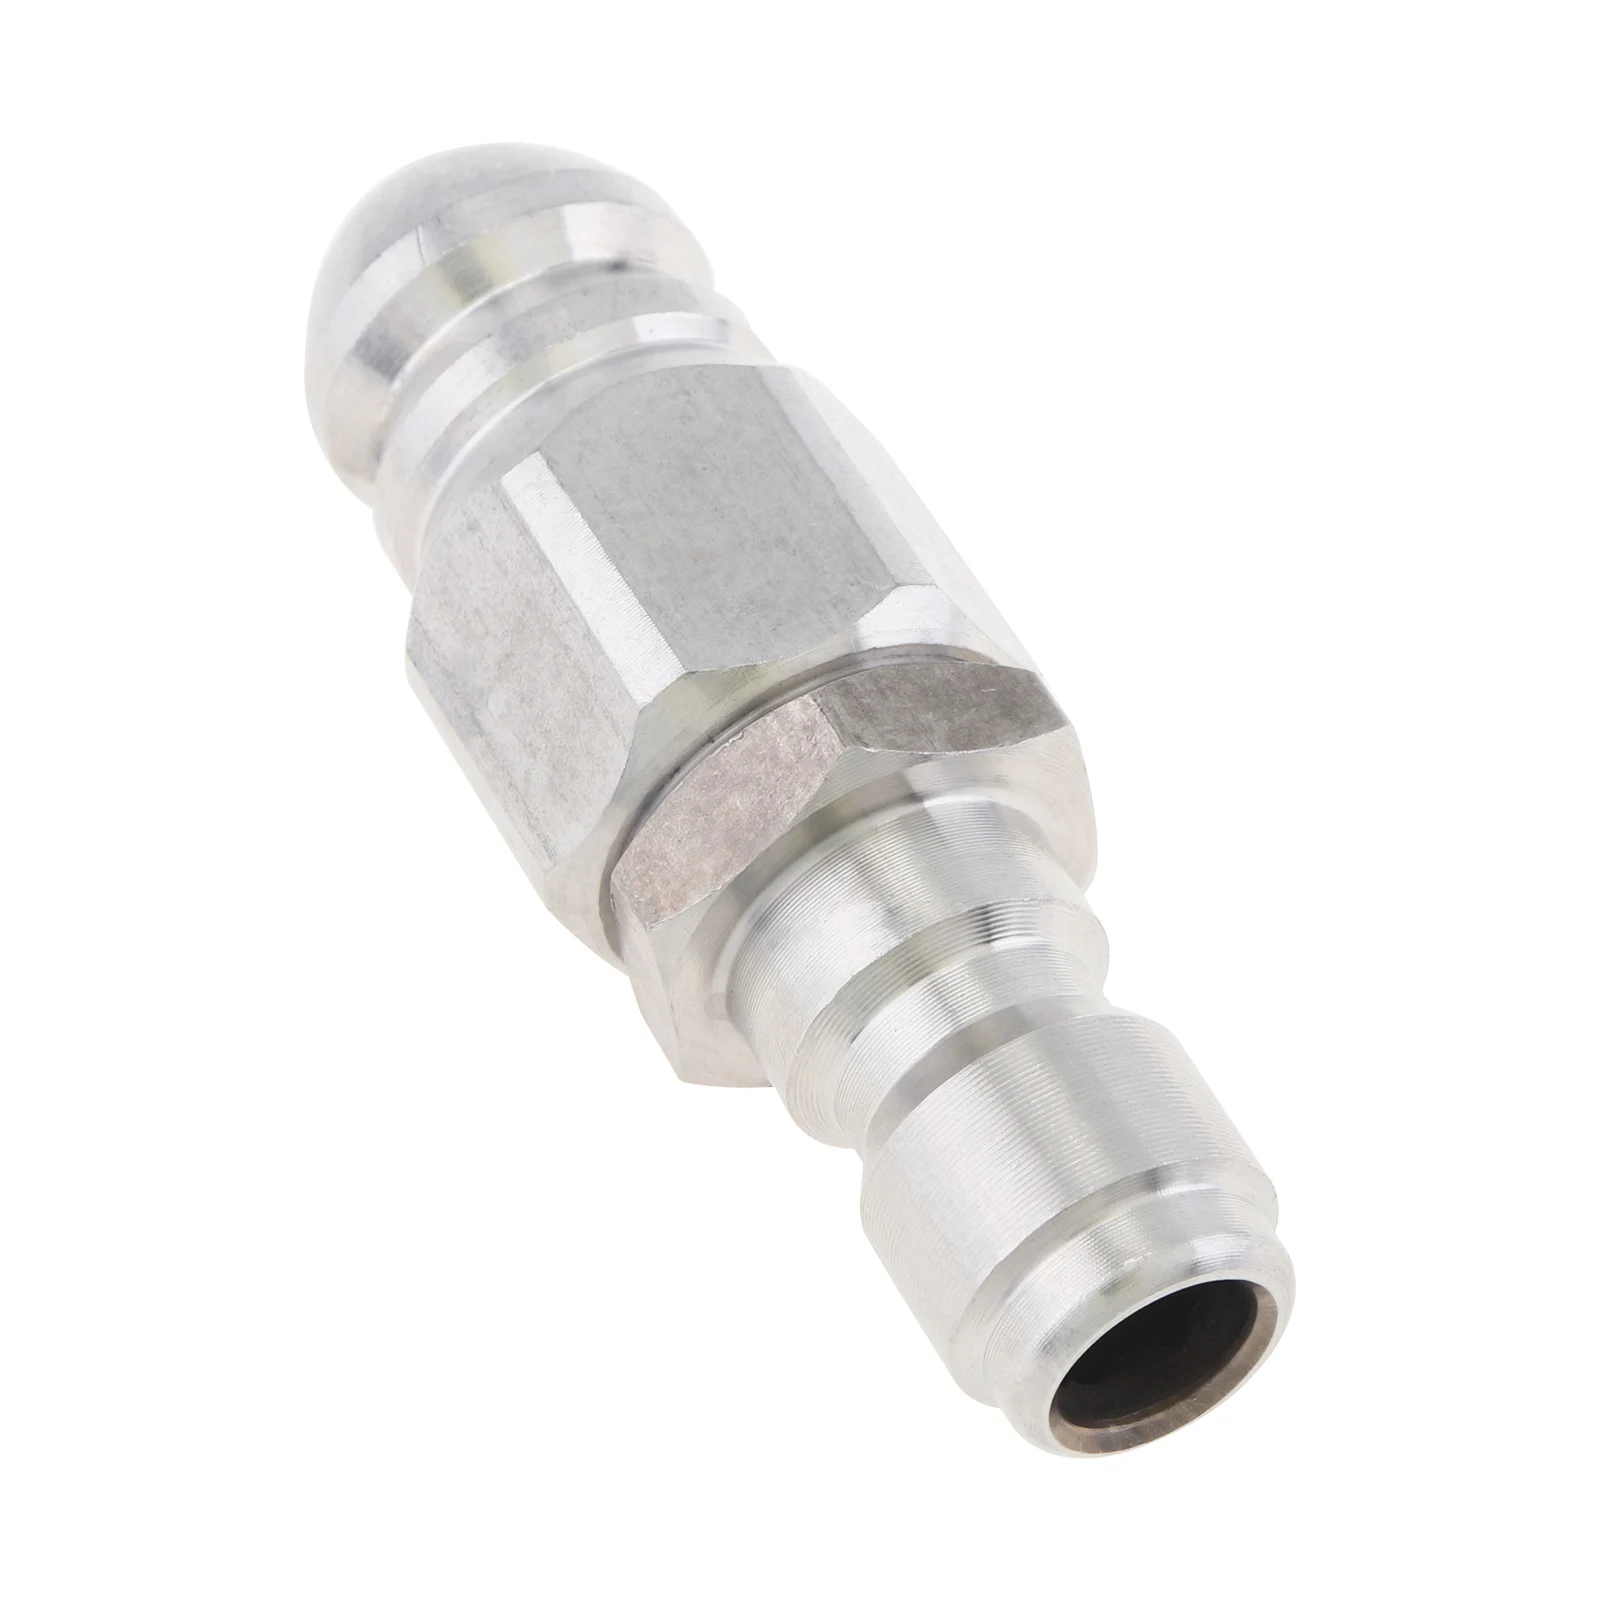 Pressure Washer Sewer Jetter Nozzle Mini Compact Quickly Connector for Drain Jetting Hose, Pressure Drain Jetter Hose Nozzle linear actuator mechanism motor mini dc small thrust 60mm 75mm 3xlr coke cup high 24v telescopic connector reciprocating plate